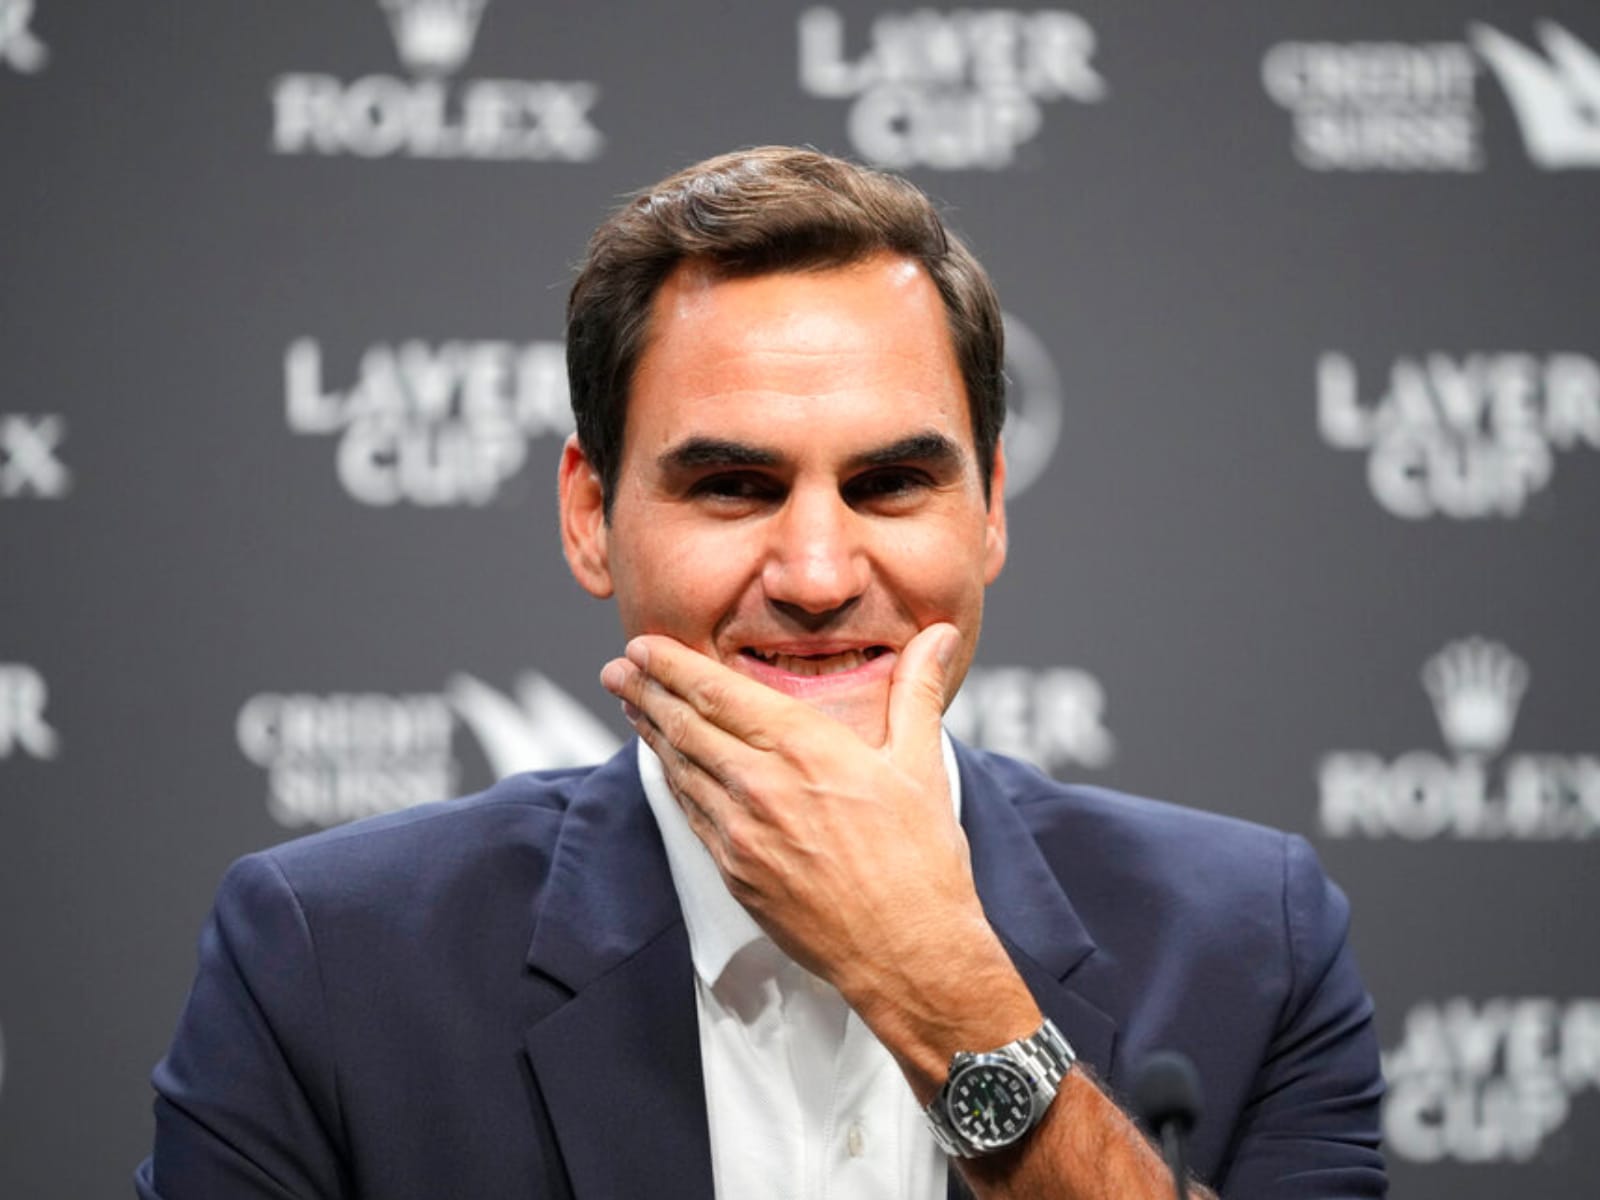 Roger Federer Has No Regrets, Relished his Great Rivalries with Rafael Nadal and Novak Djokovic